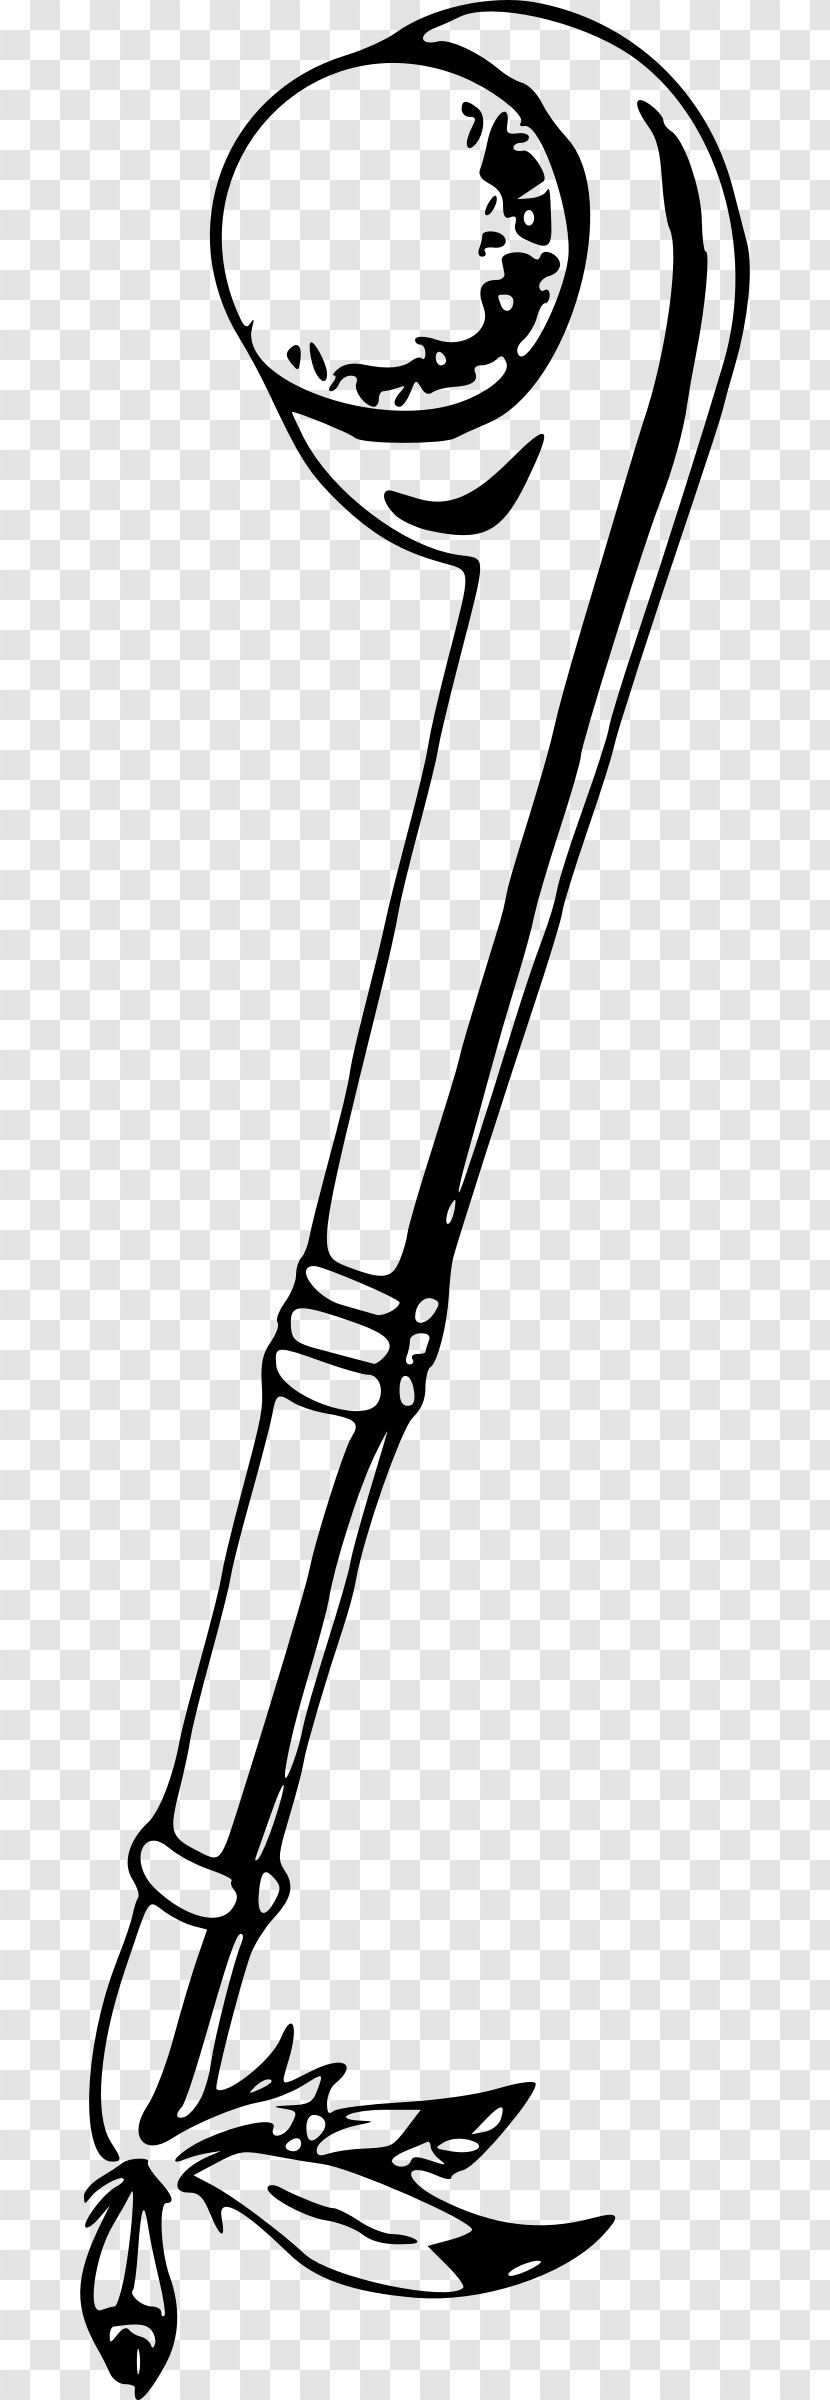 Tomahawk Drawing Indigenous Peoples Of The Americas Coloring Book Knife - Native Americans In United States - Axe Transparent PNG